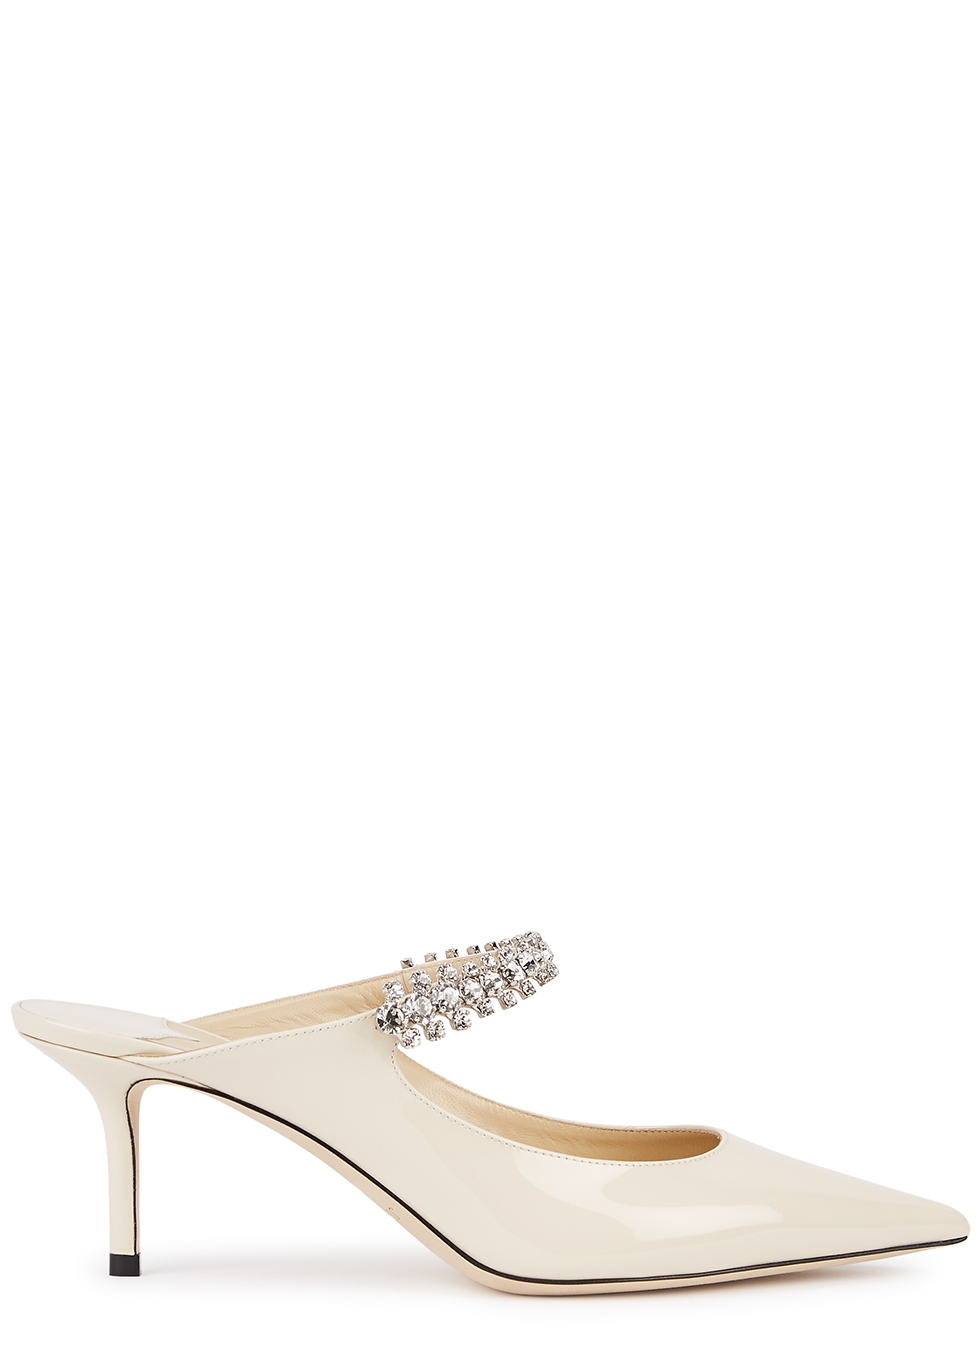 Jimmy Choo Bing 65 off-white patent leather mules